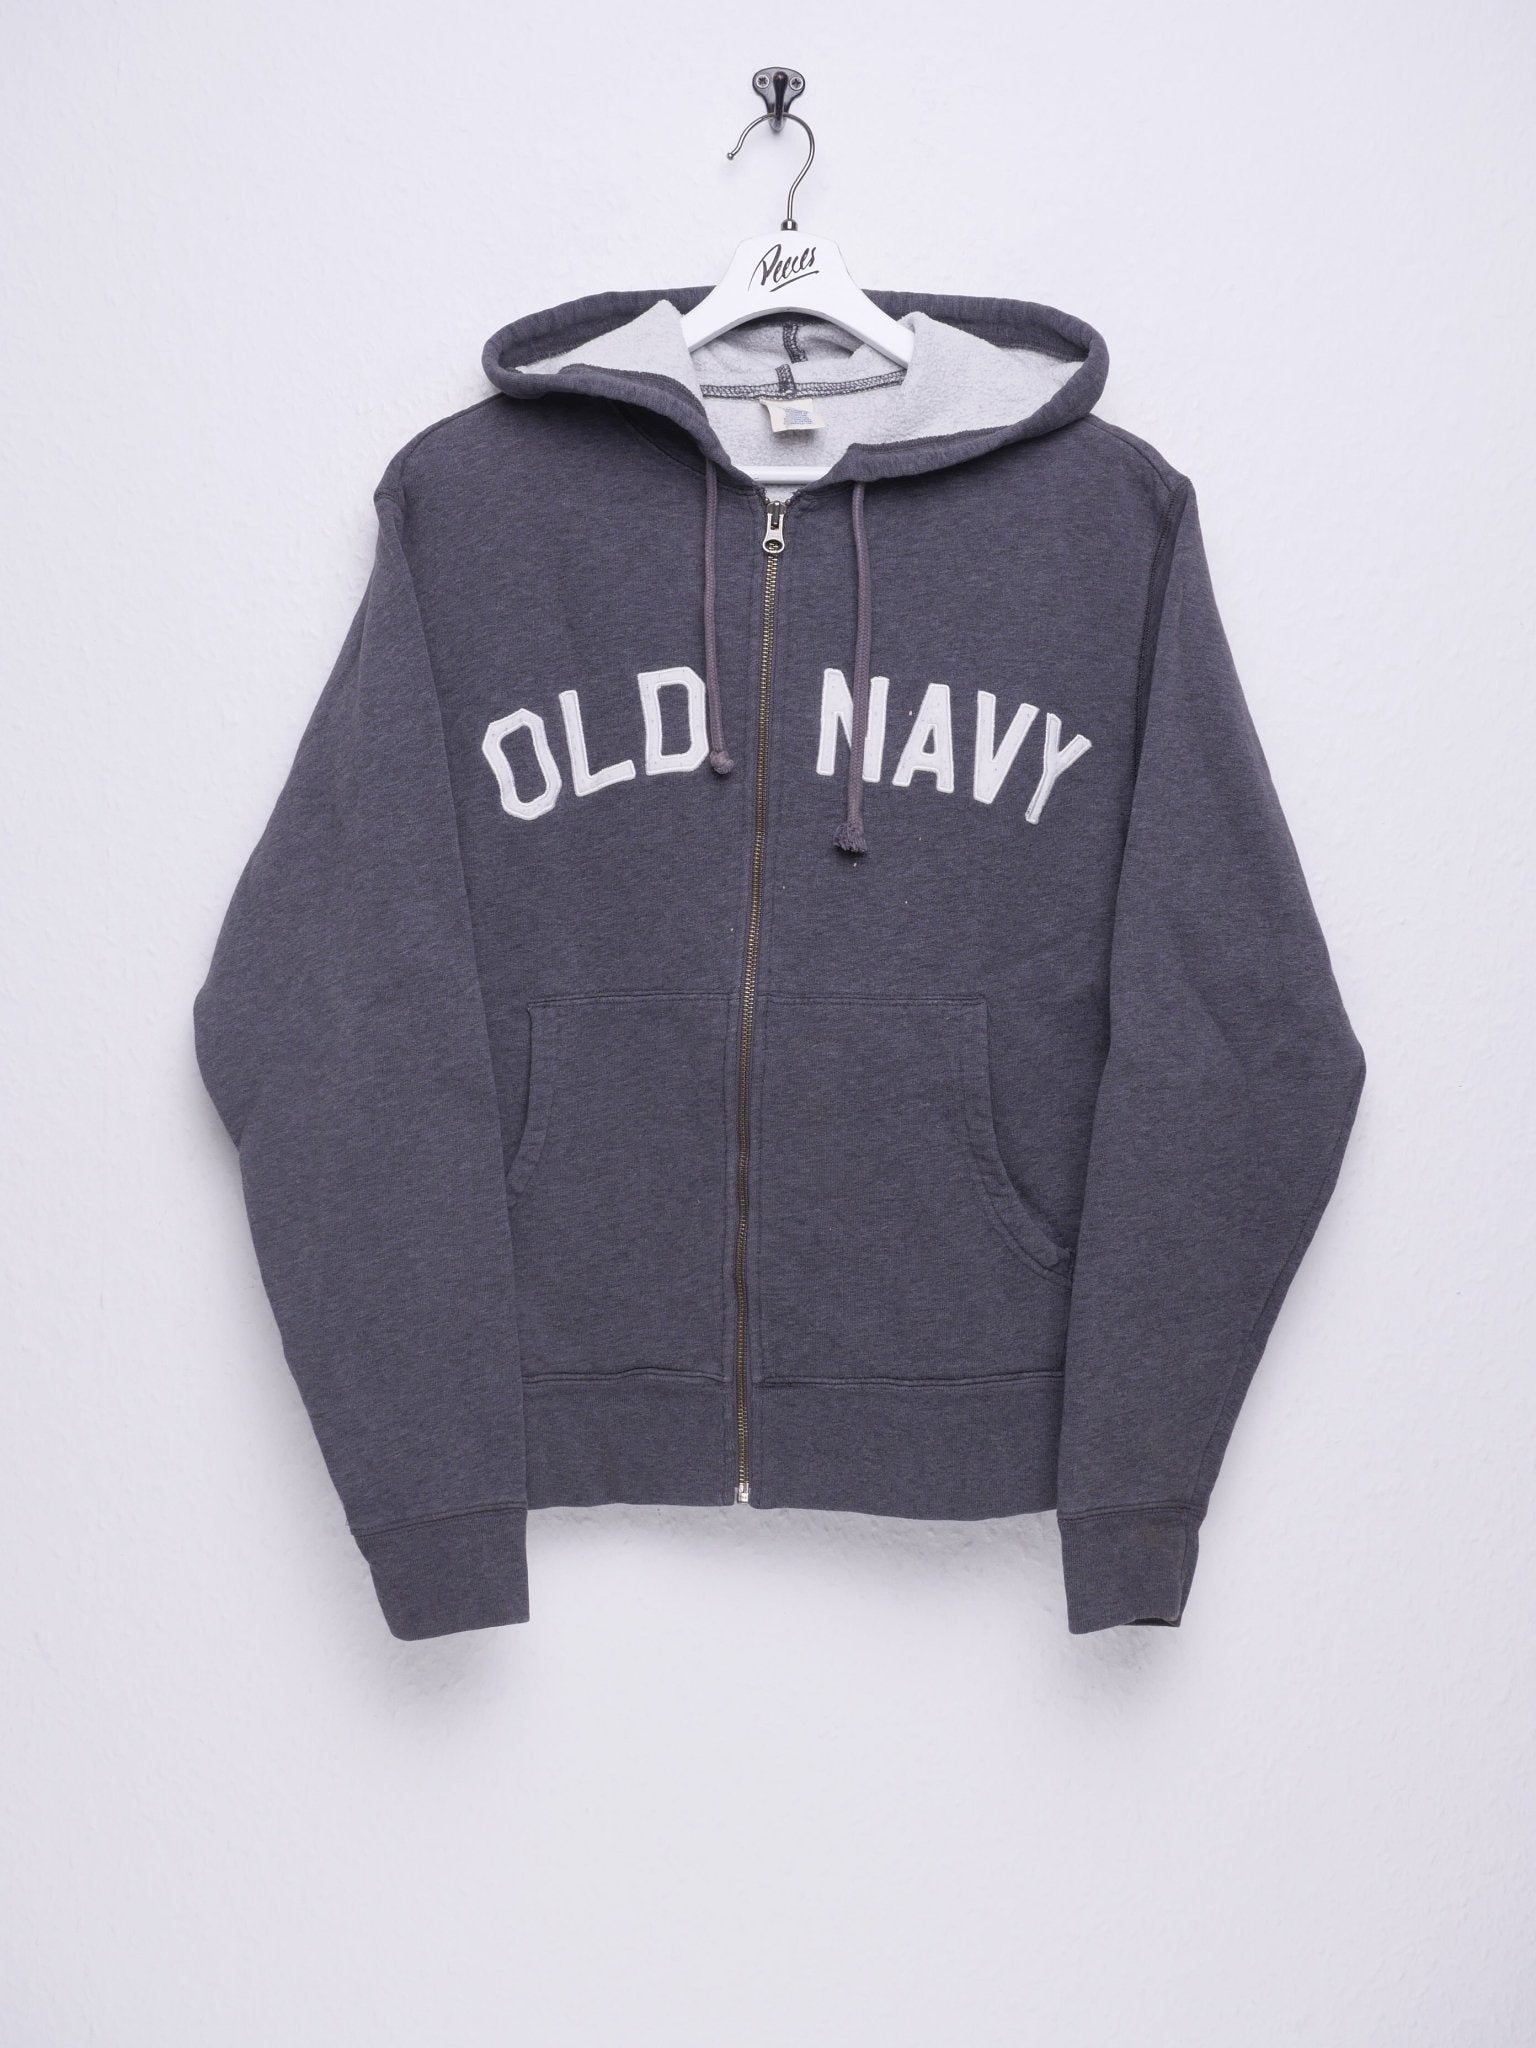 Old Navy embroidered Spellout Vintage Zip Hoodie - Peeces